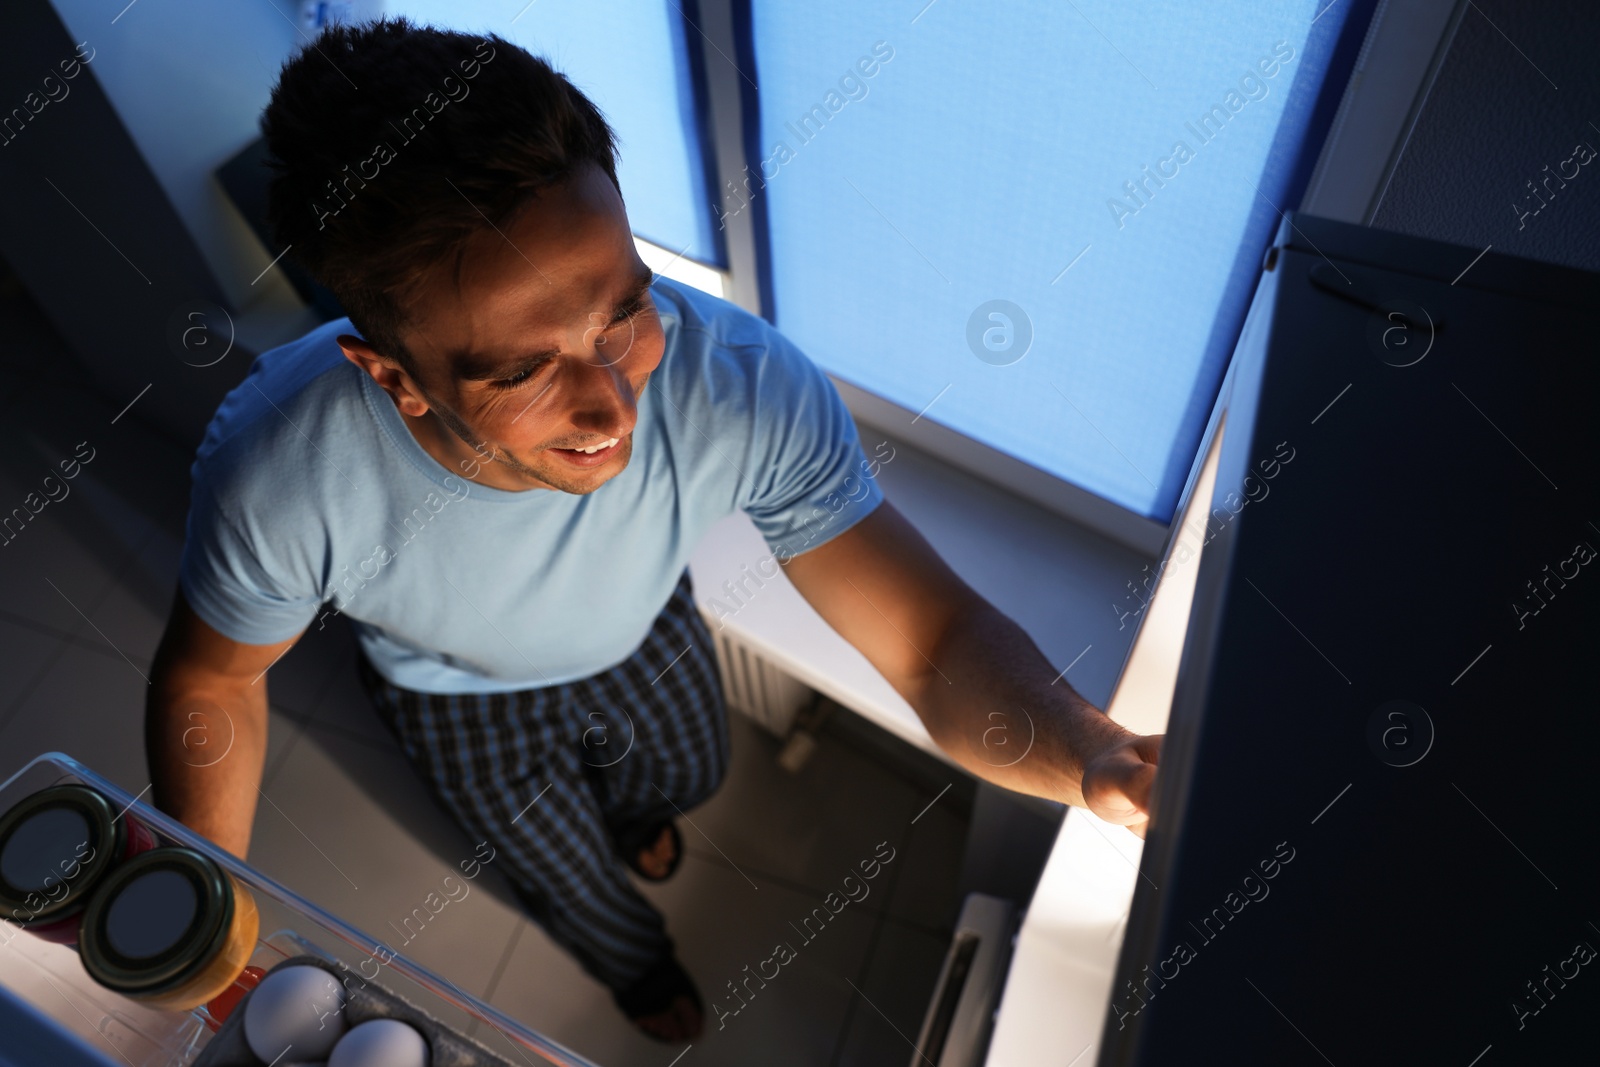 Photo of Man taking products out of refrigerator in kitchen at night, high angle view